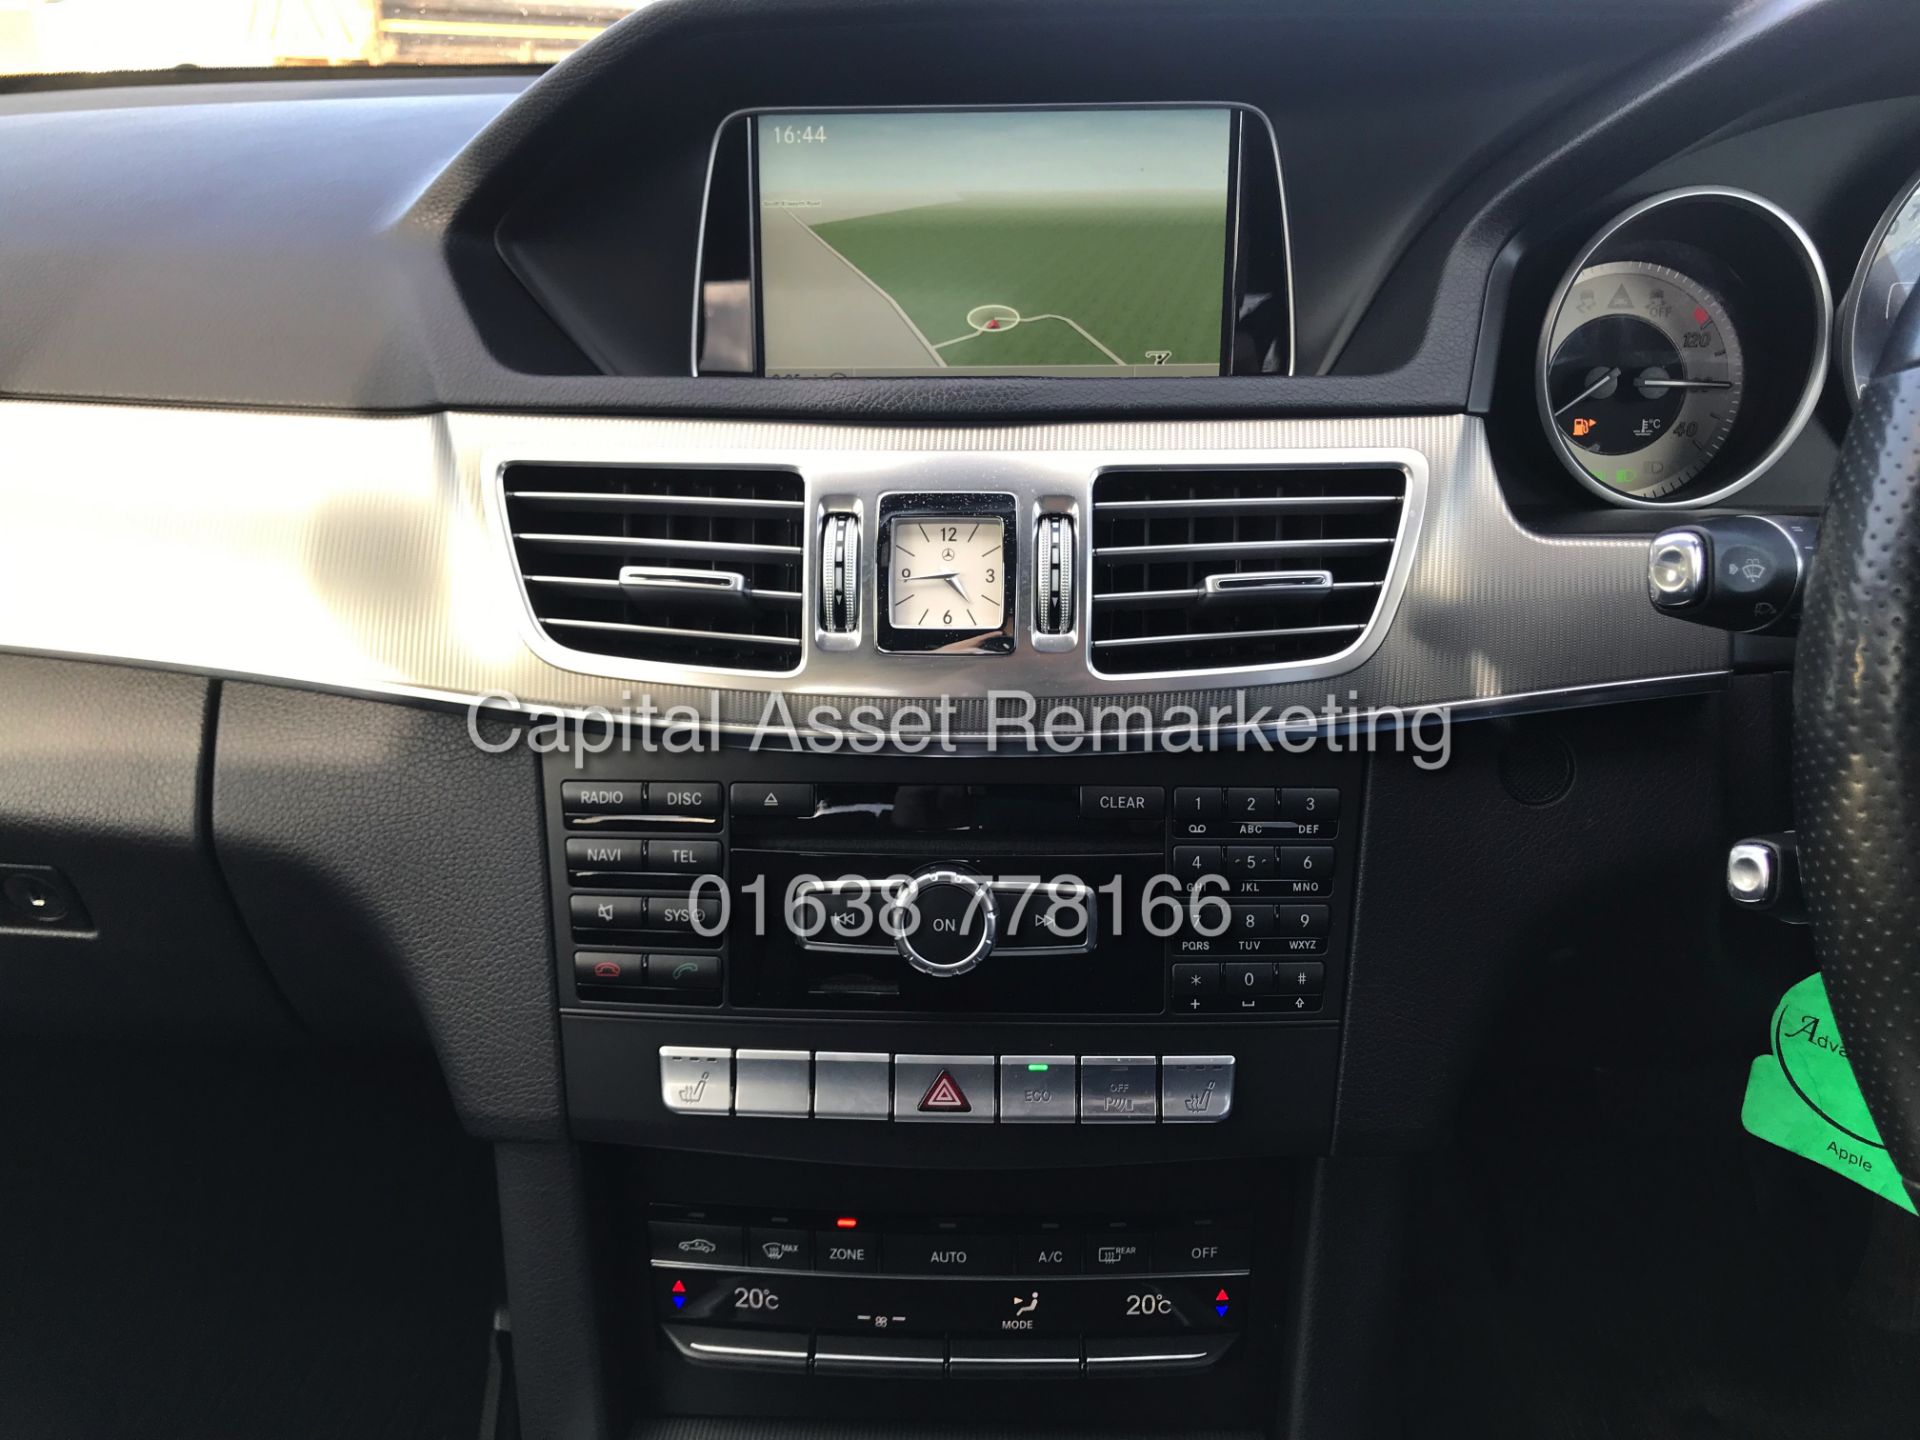 MERCEDES E220d "SPECIAL EQUIPMENT" 7G TRONIC AUTO (2015 MODEL) 1 OWNER - SAT NAV - LEATHER - Image 17 of 26